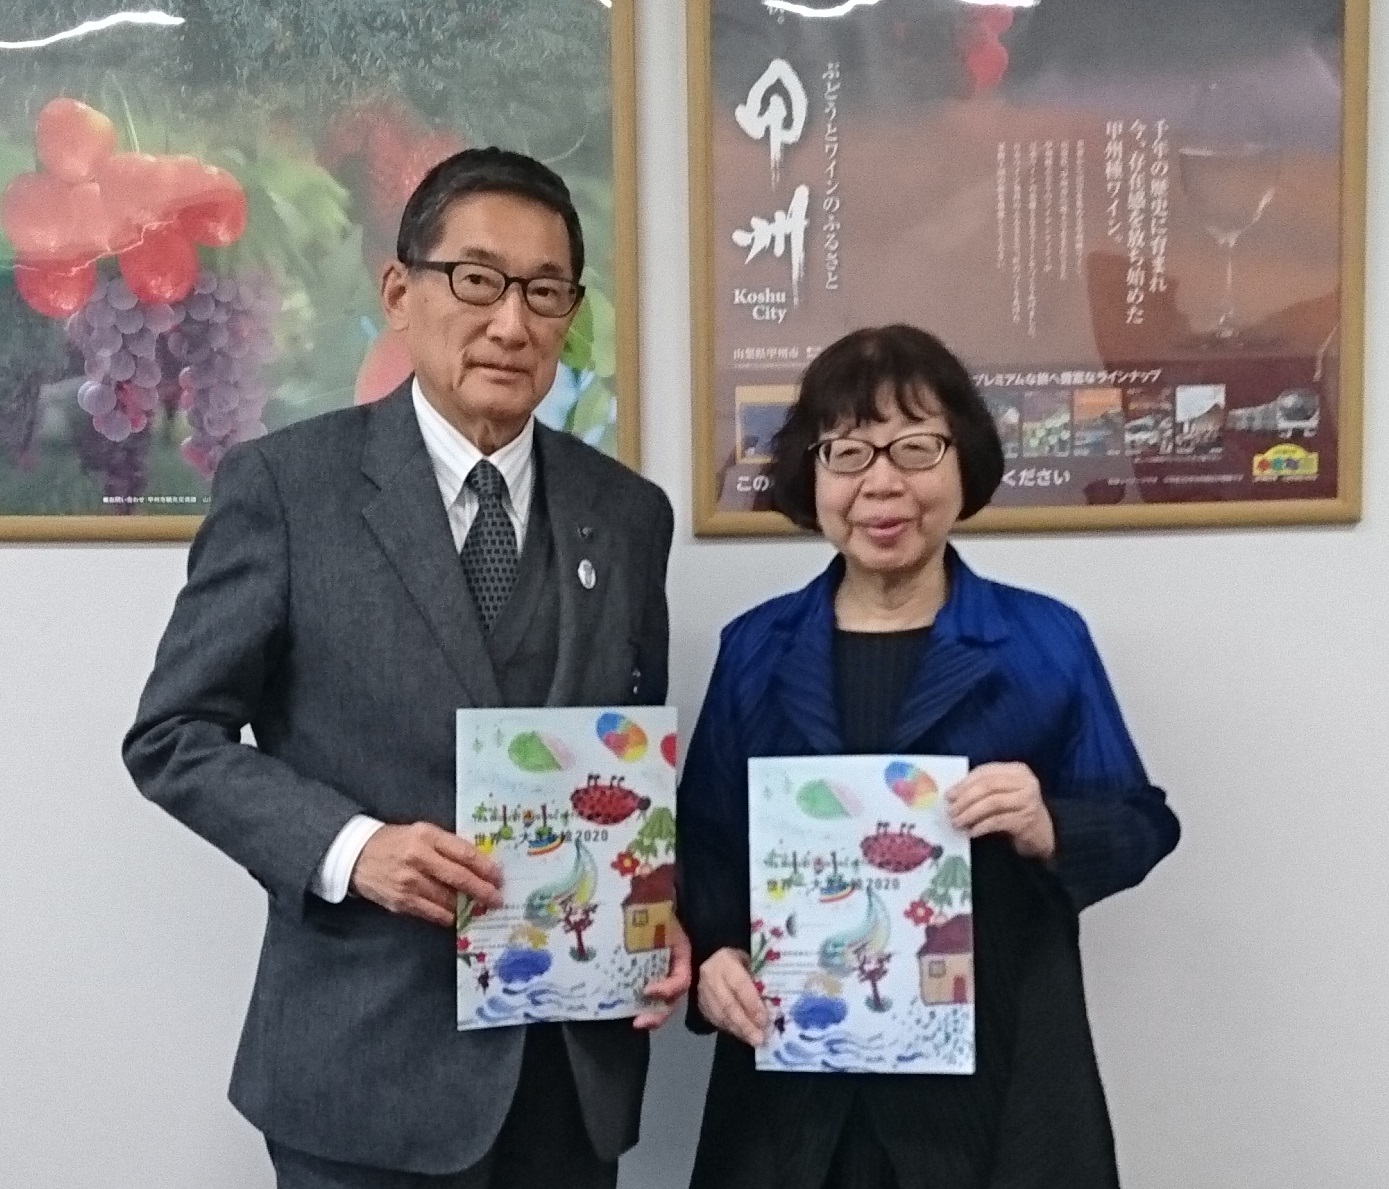 Visited the municipal office of Koshu City in Yamanashi prefecture to describe the Biggest Painting in the World 2020. The mayor expressed their commitment.